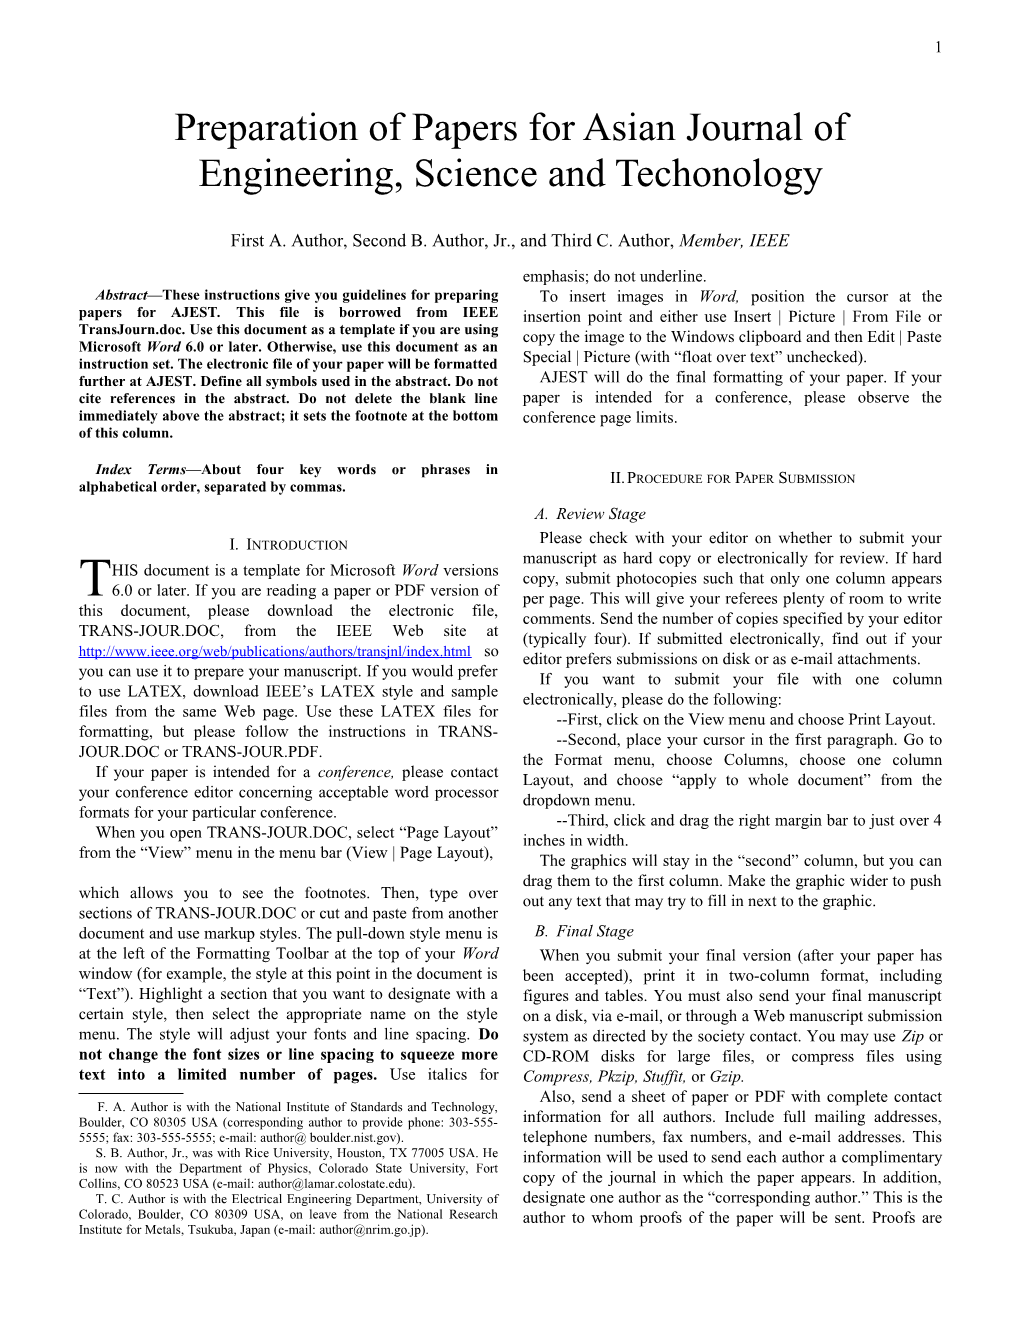 Preparation of Papers for Asian Journal of Engineering, Science and Techonology